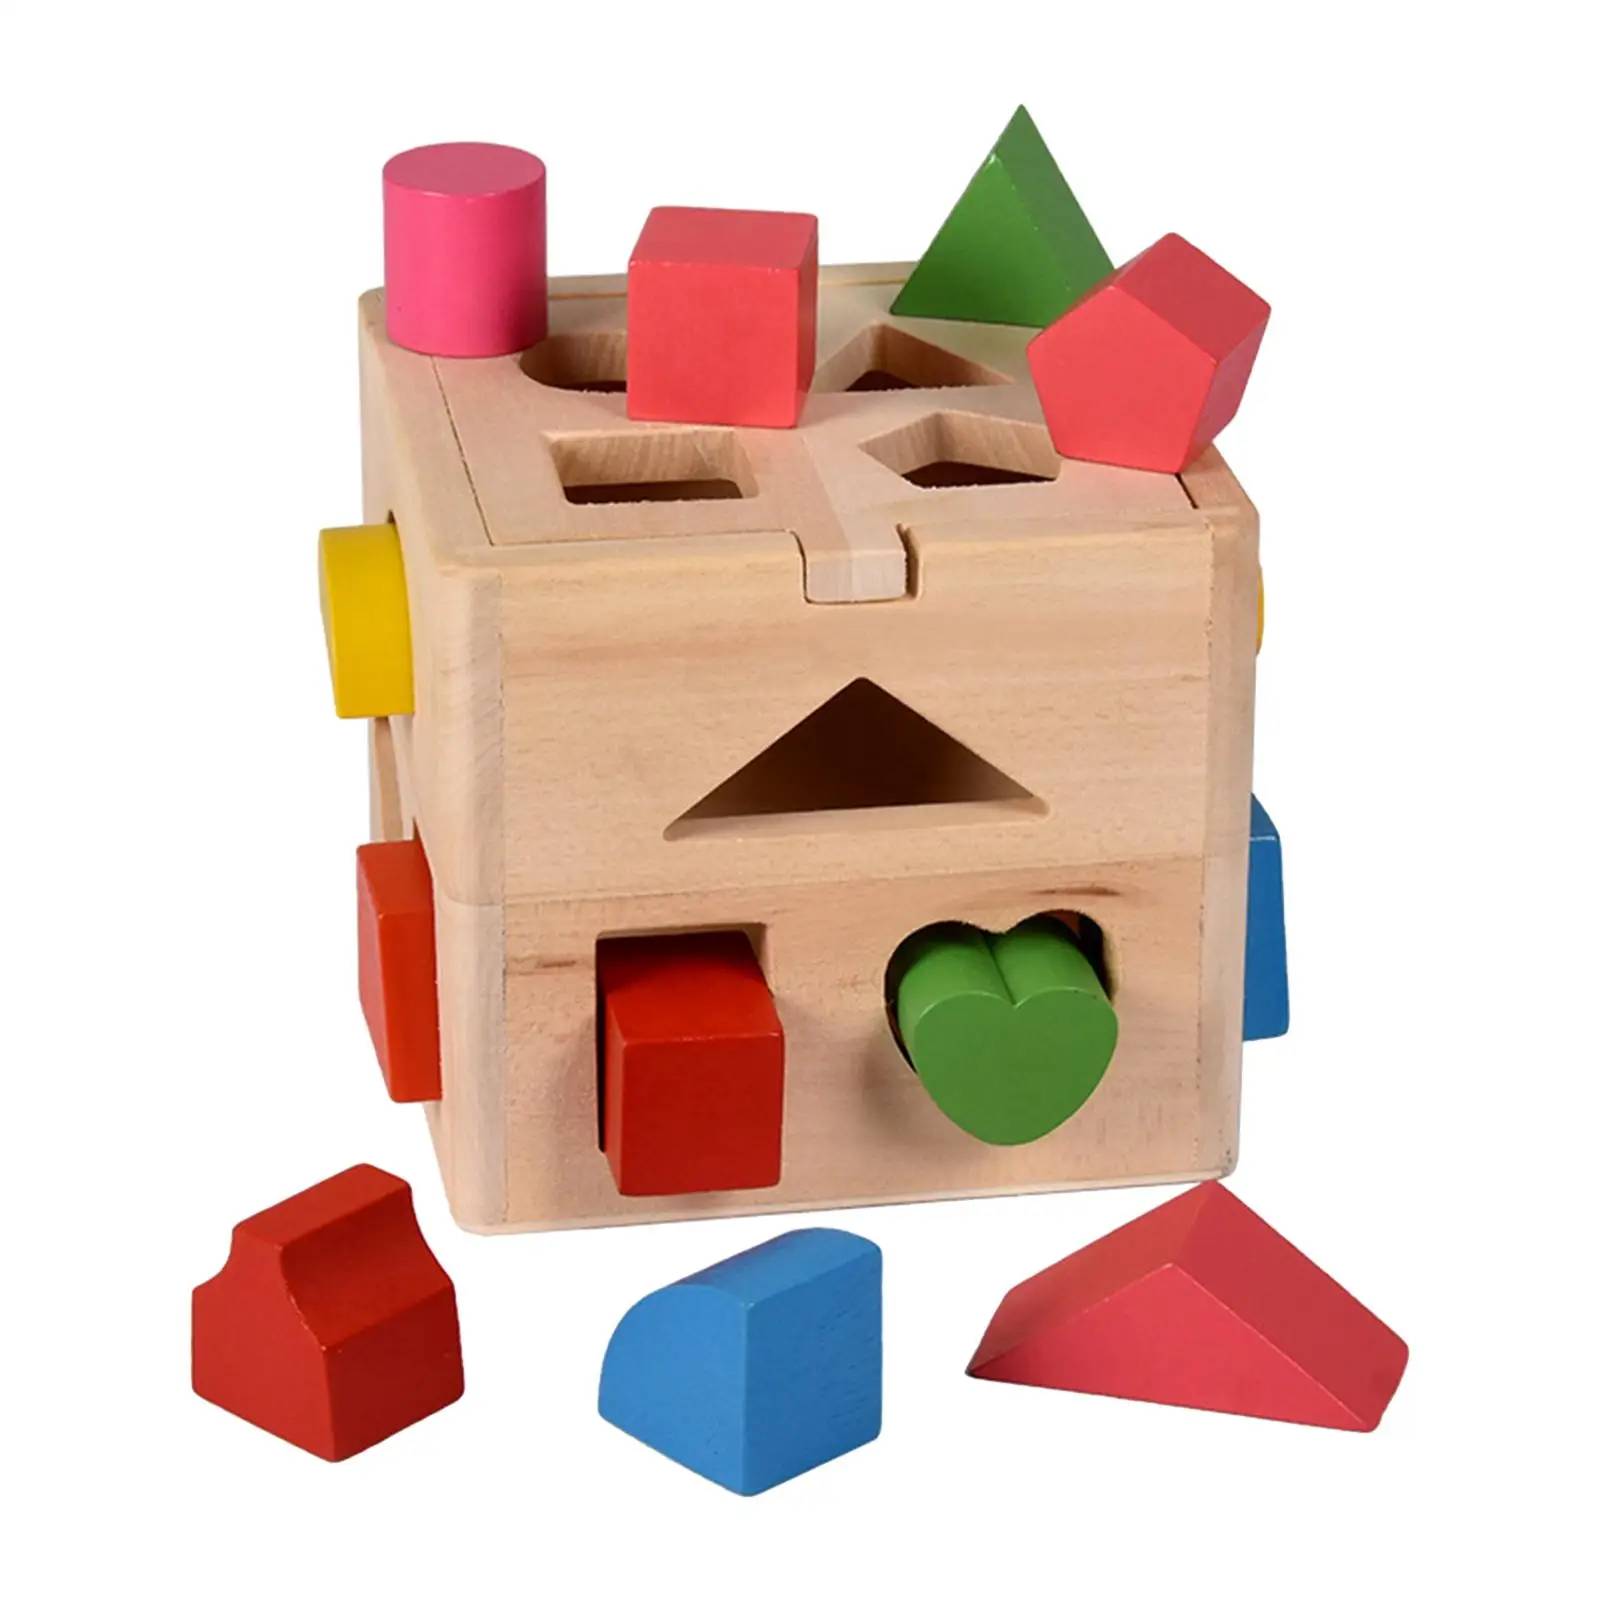 Wooden Shape Sorter Cube Geometric Shapes Toy Puzzles Preschool Learning Toys for Kids Girls Preschool Holiday Gifts